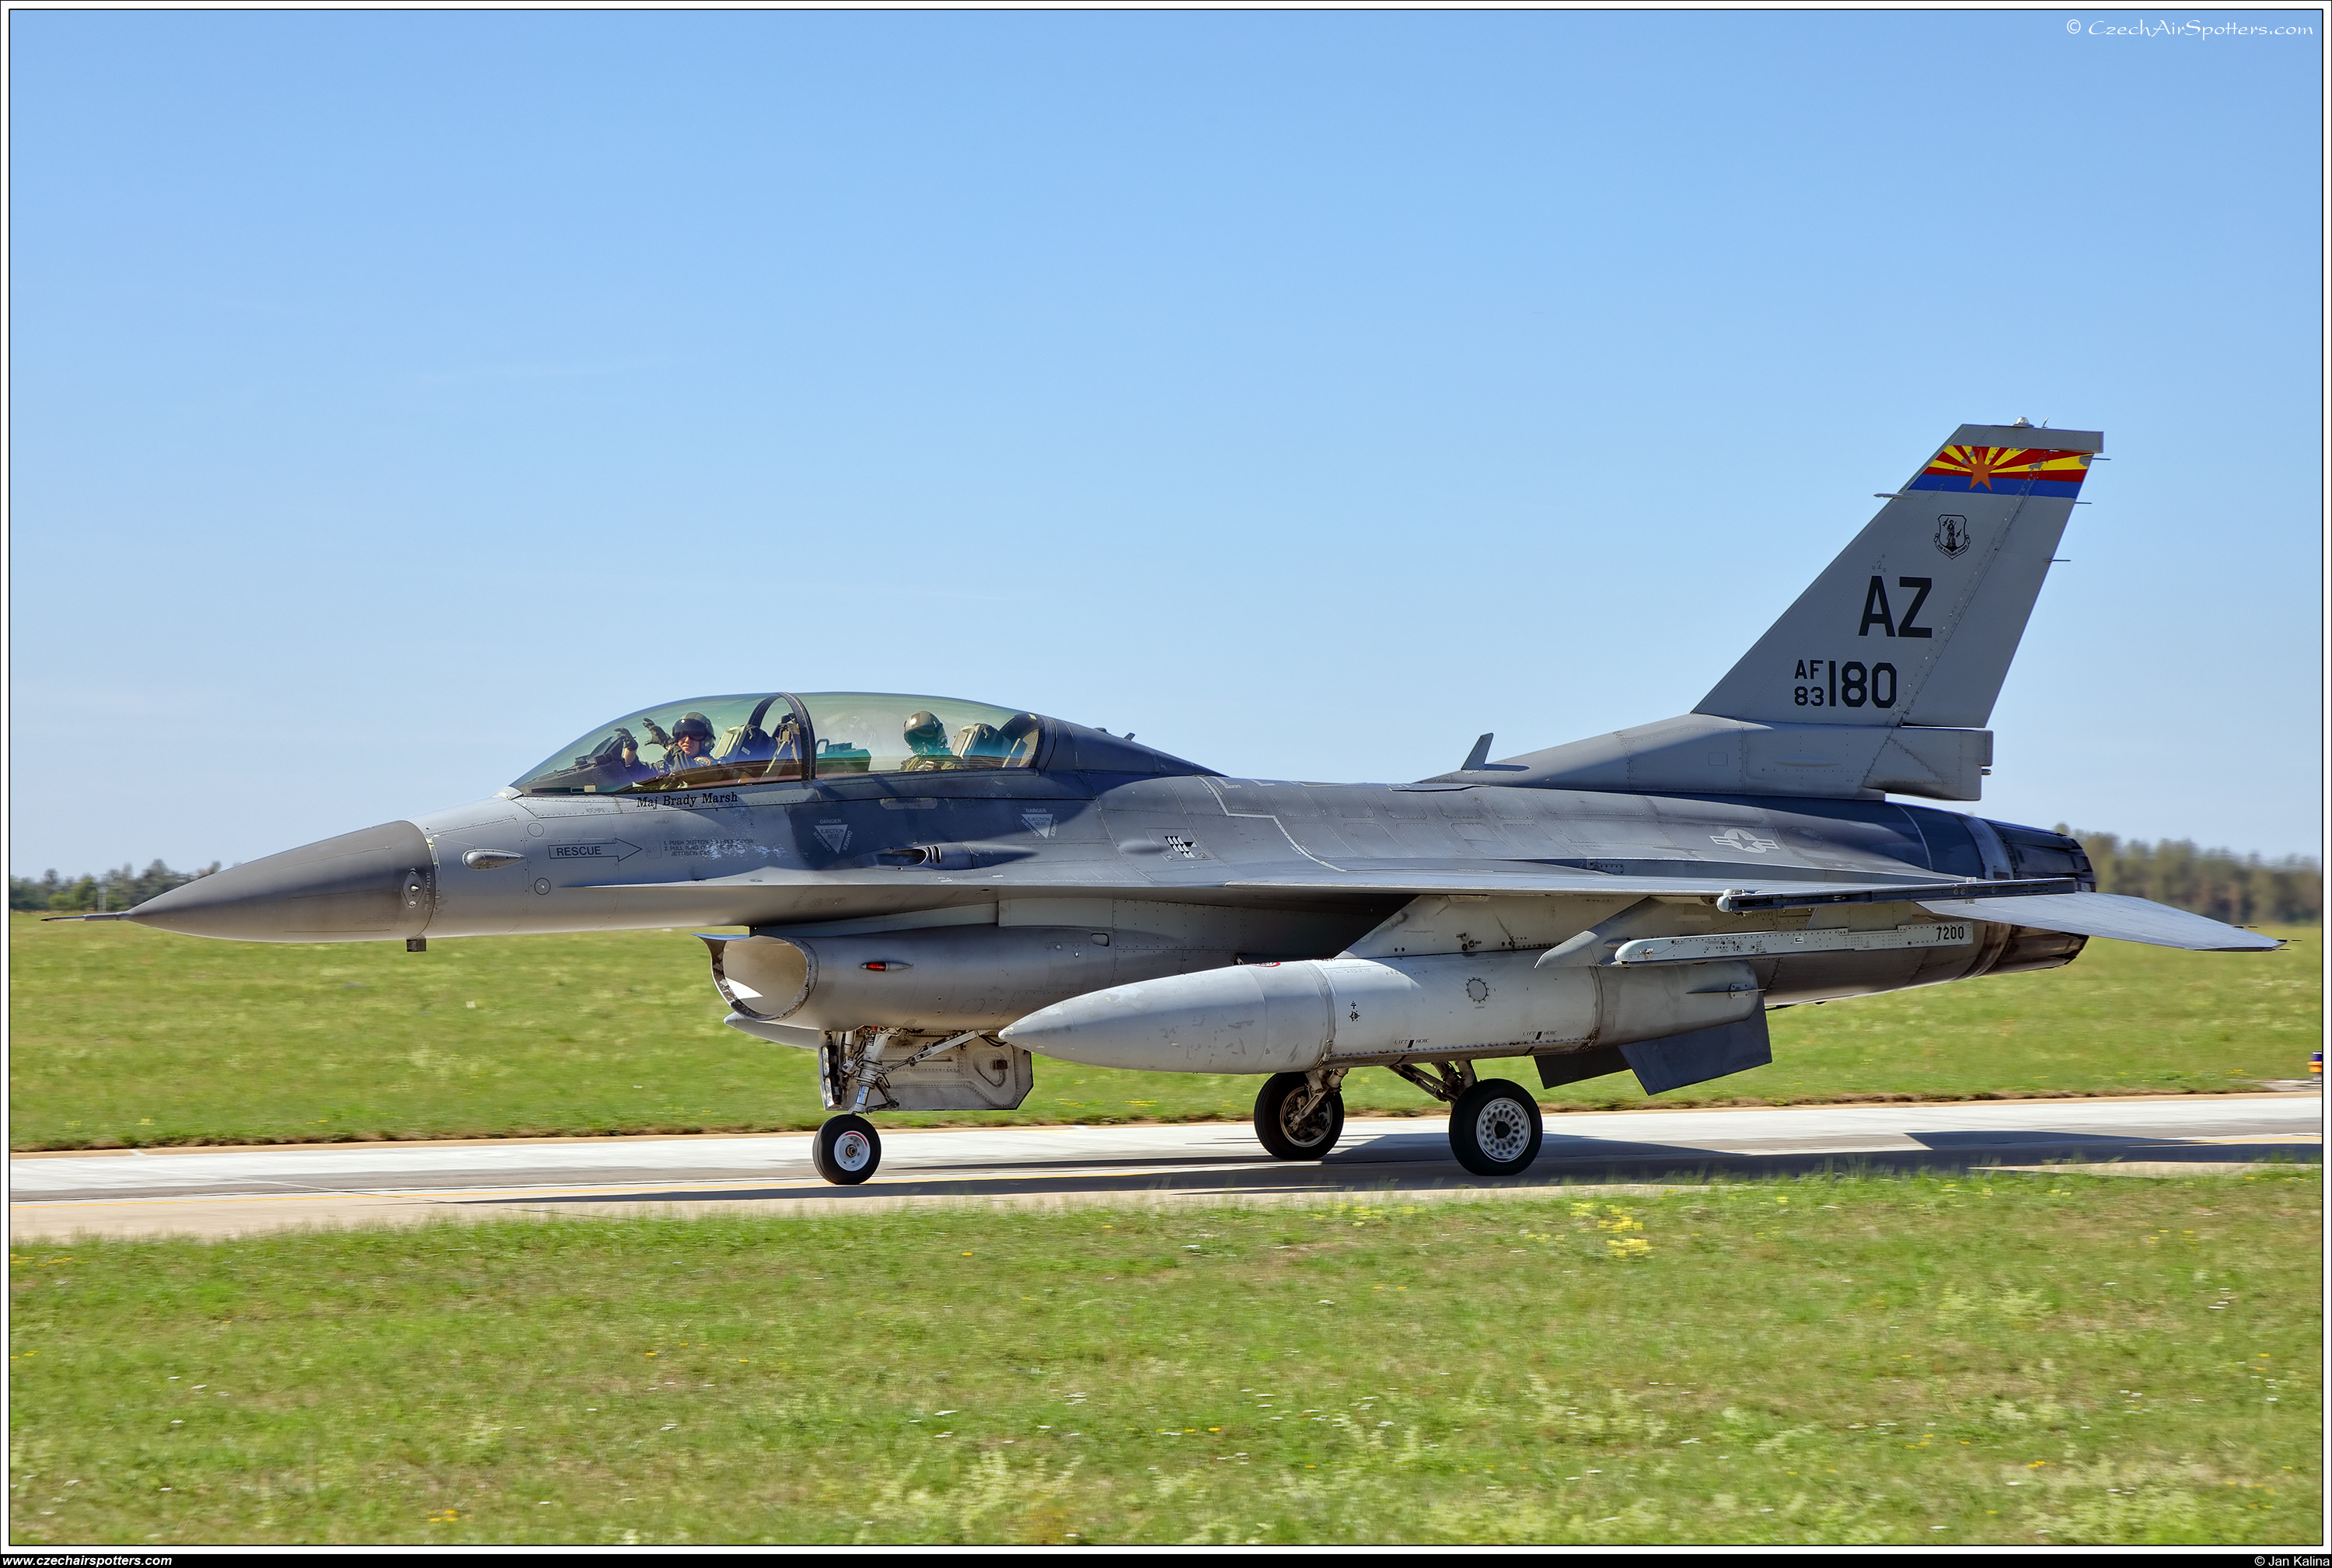 USA - Air Force – General Dynamics F-16D Fighting Falcon 83-1180